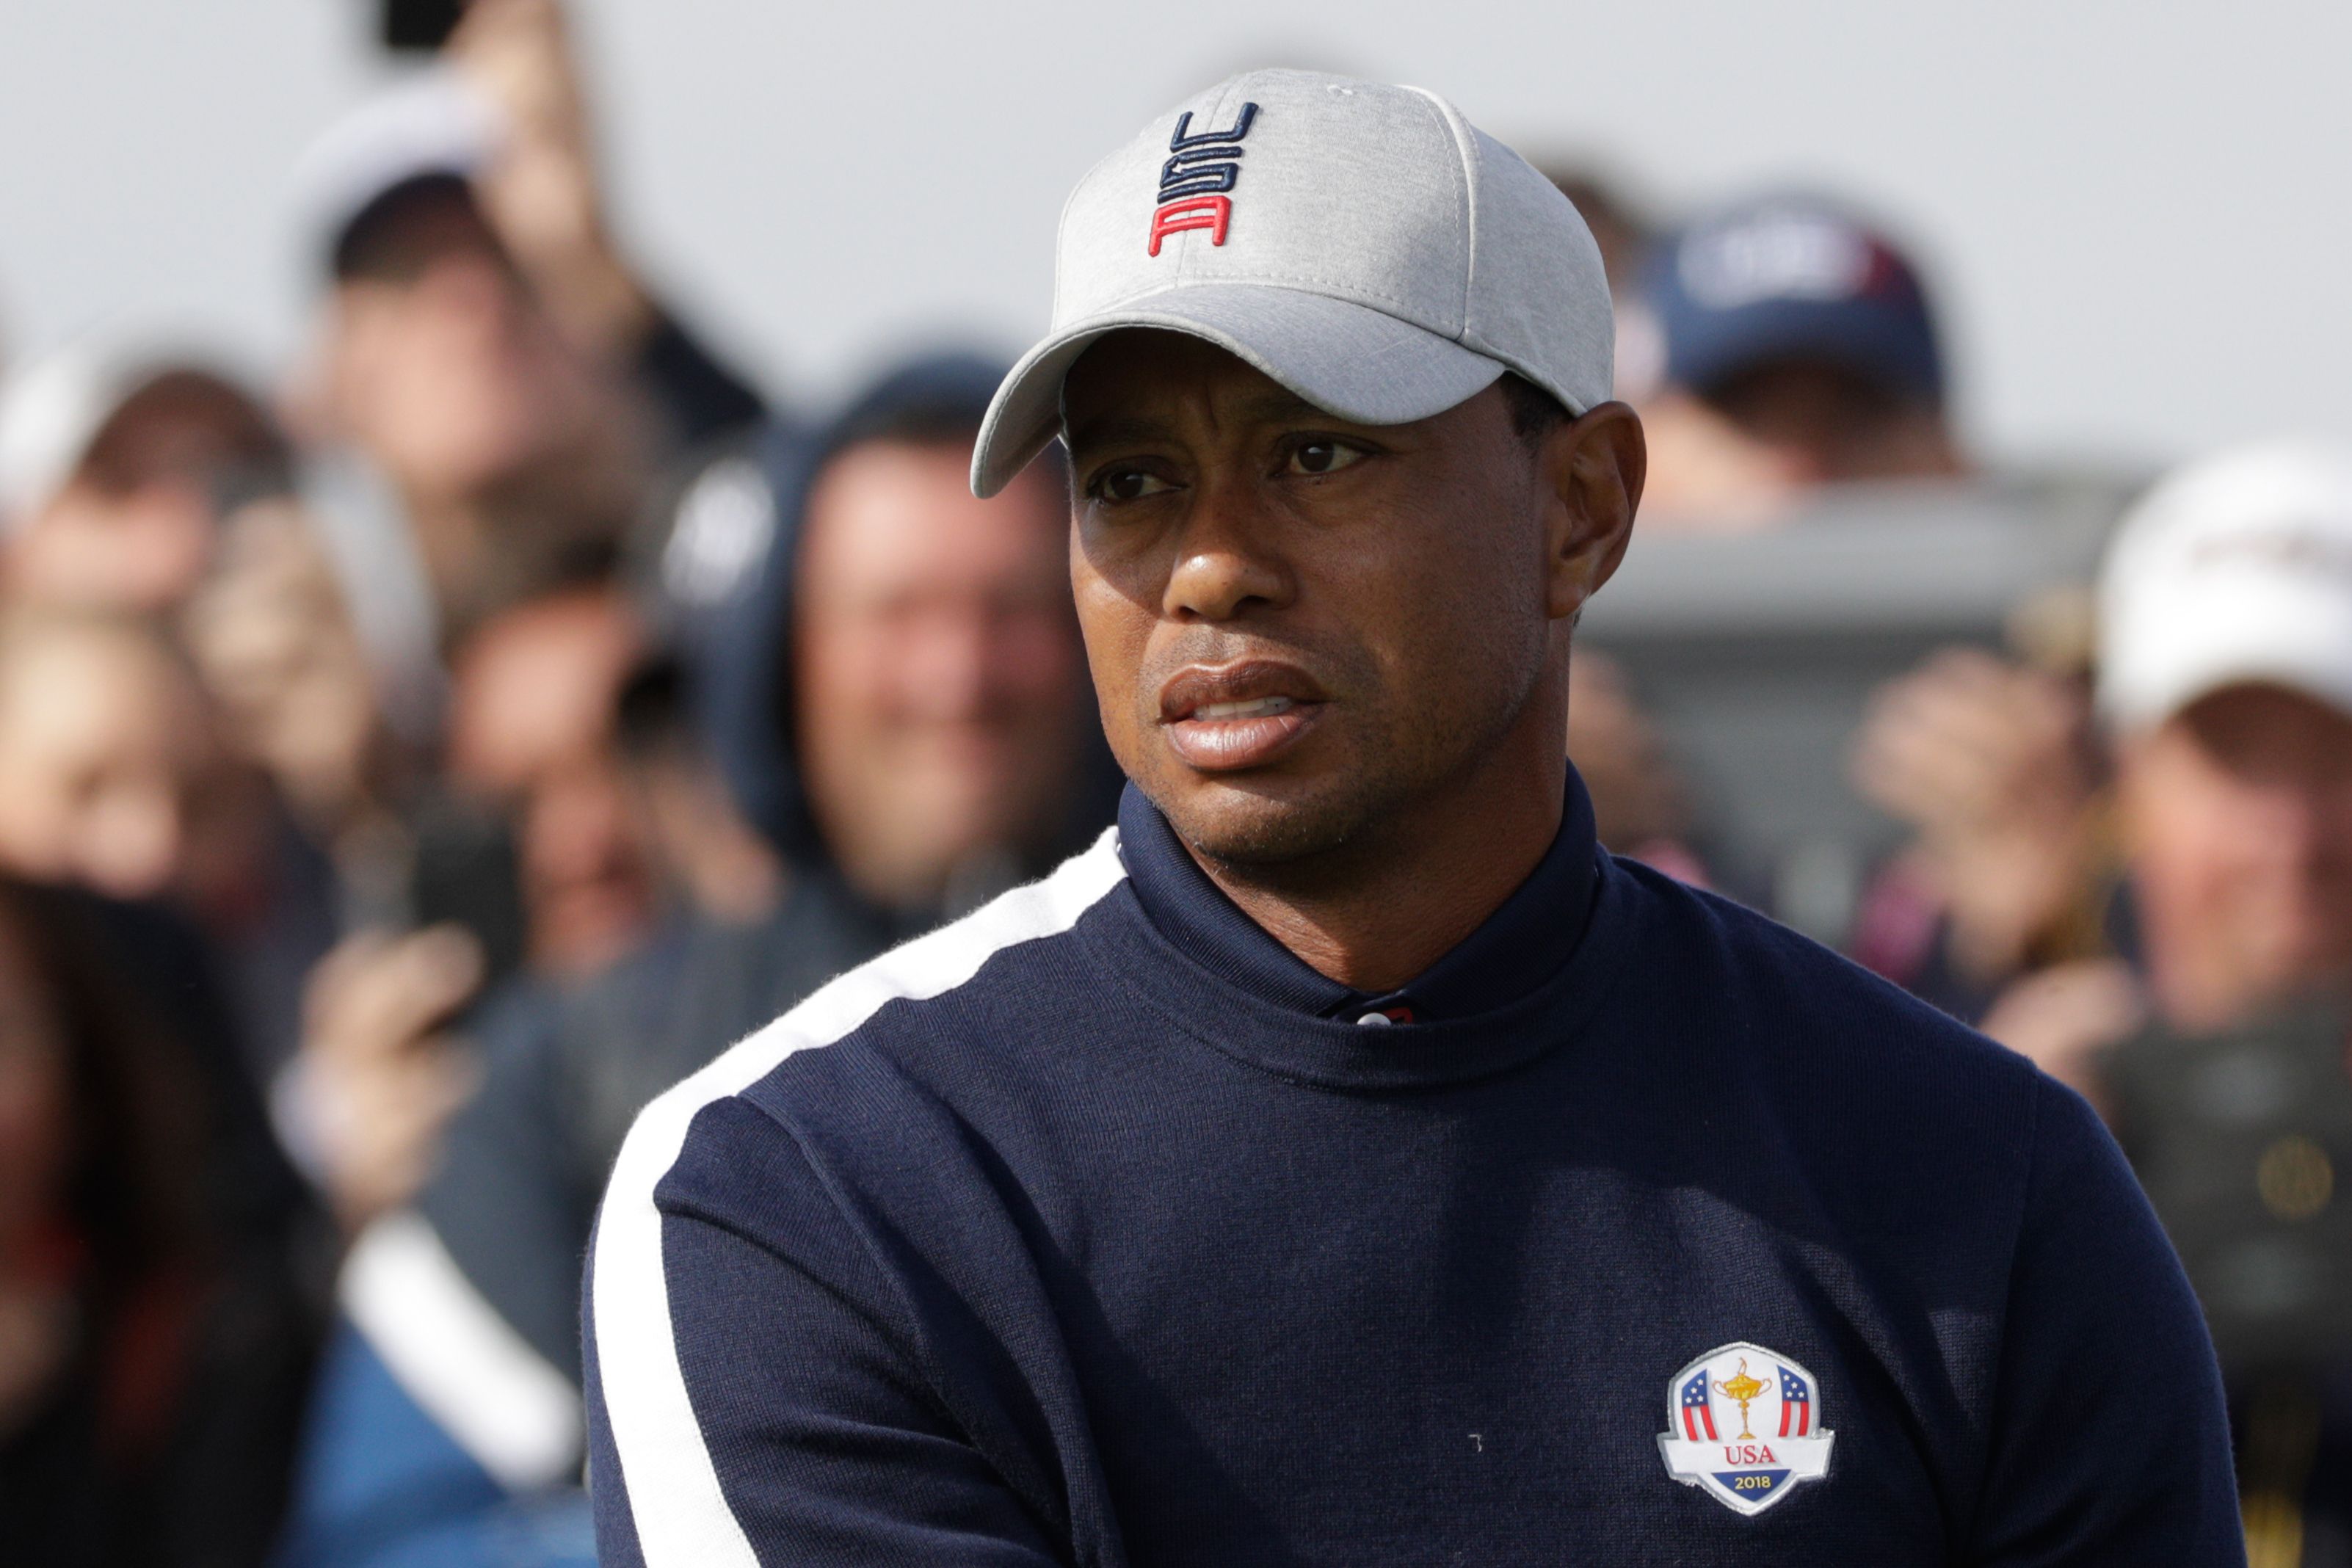 Tiger Woods was asked if wanted to play Ryder Cup foursomes, said no